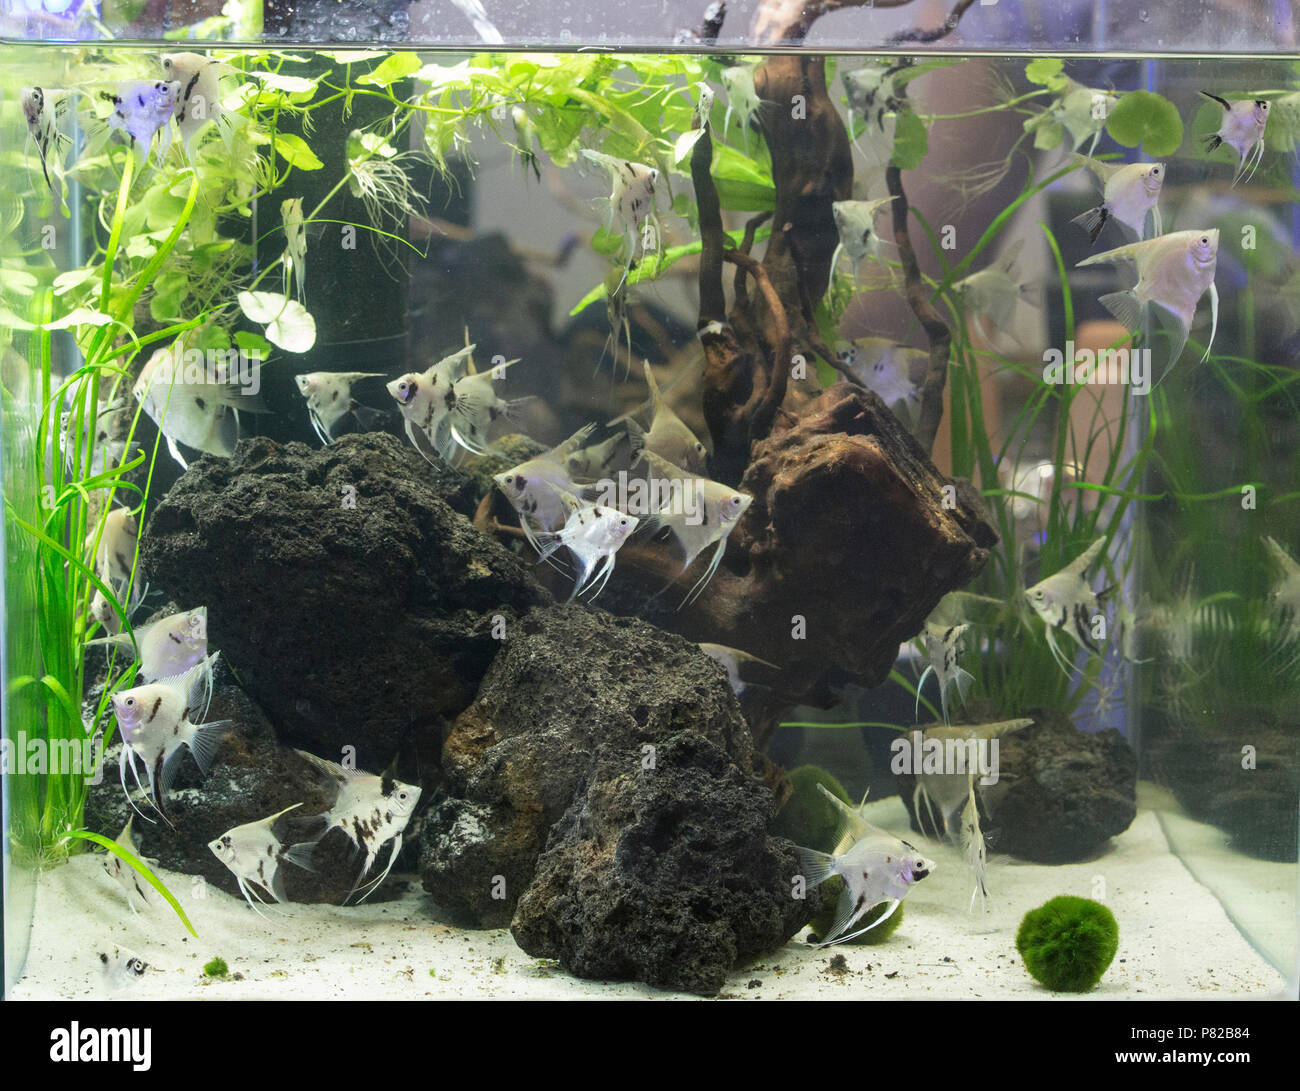 Cichlid aquarium with plants and lot of fishes Stock Photo